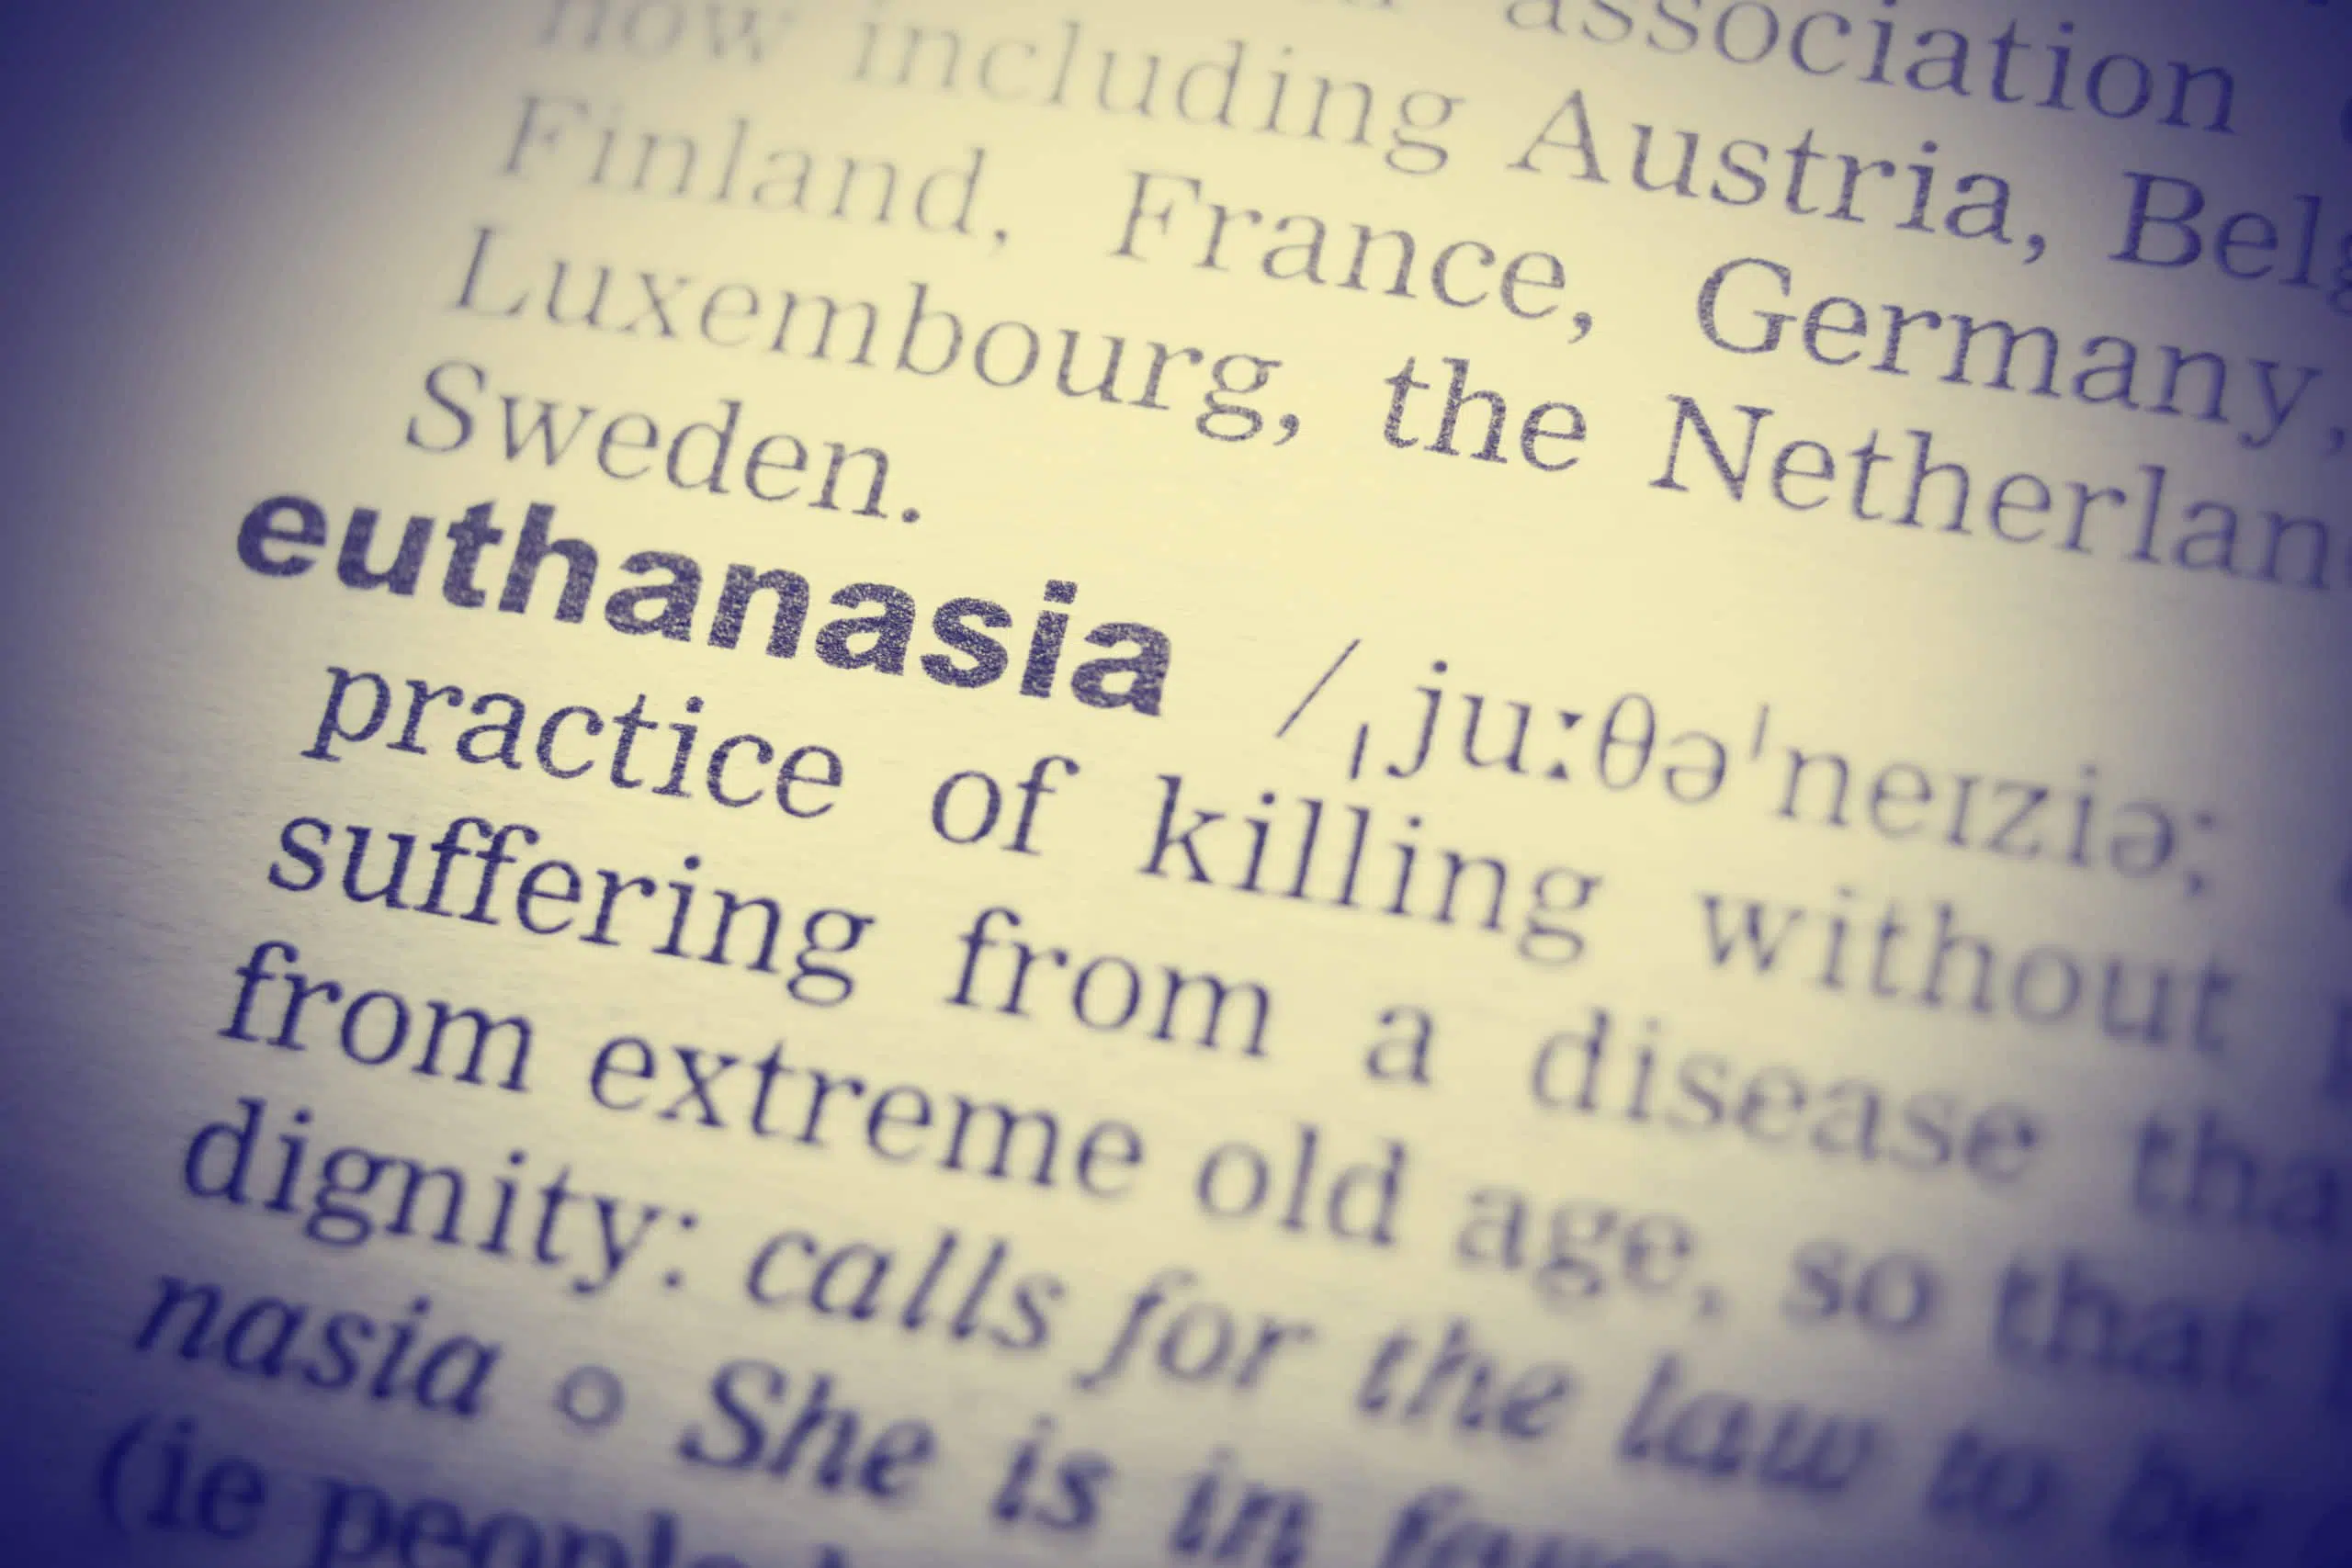 Definition of word euthanasia in dictionary. Close up shot